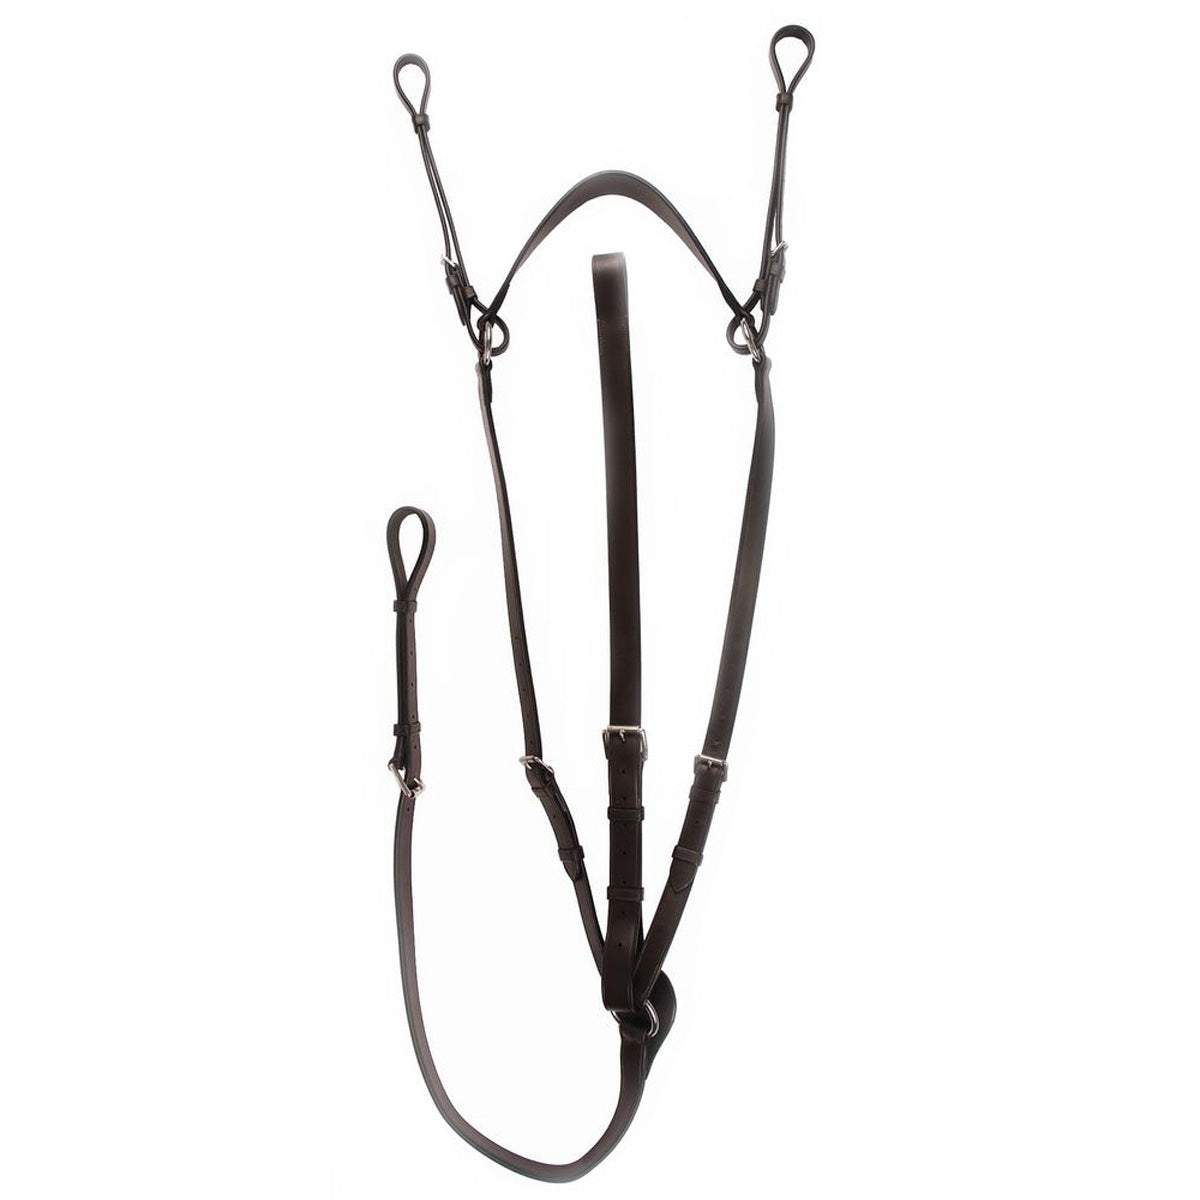 HDR Advantage Flat Breastplate Martingale with Standing Attachment